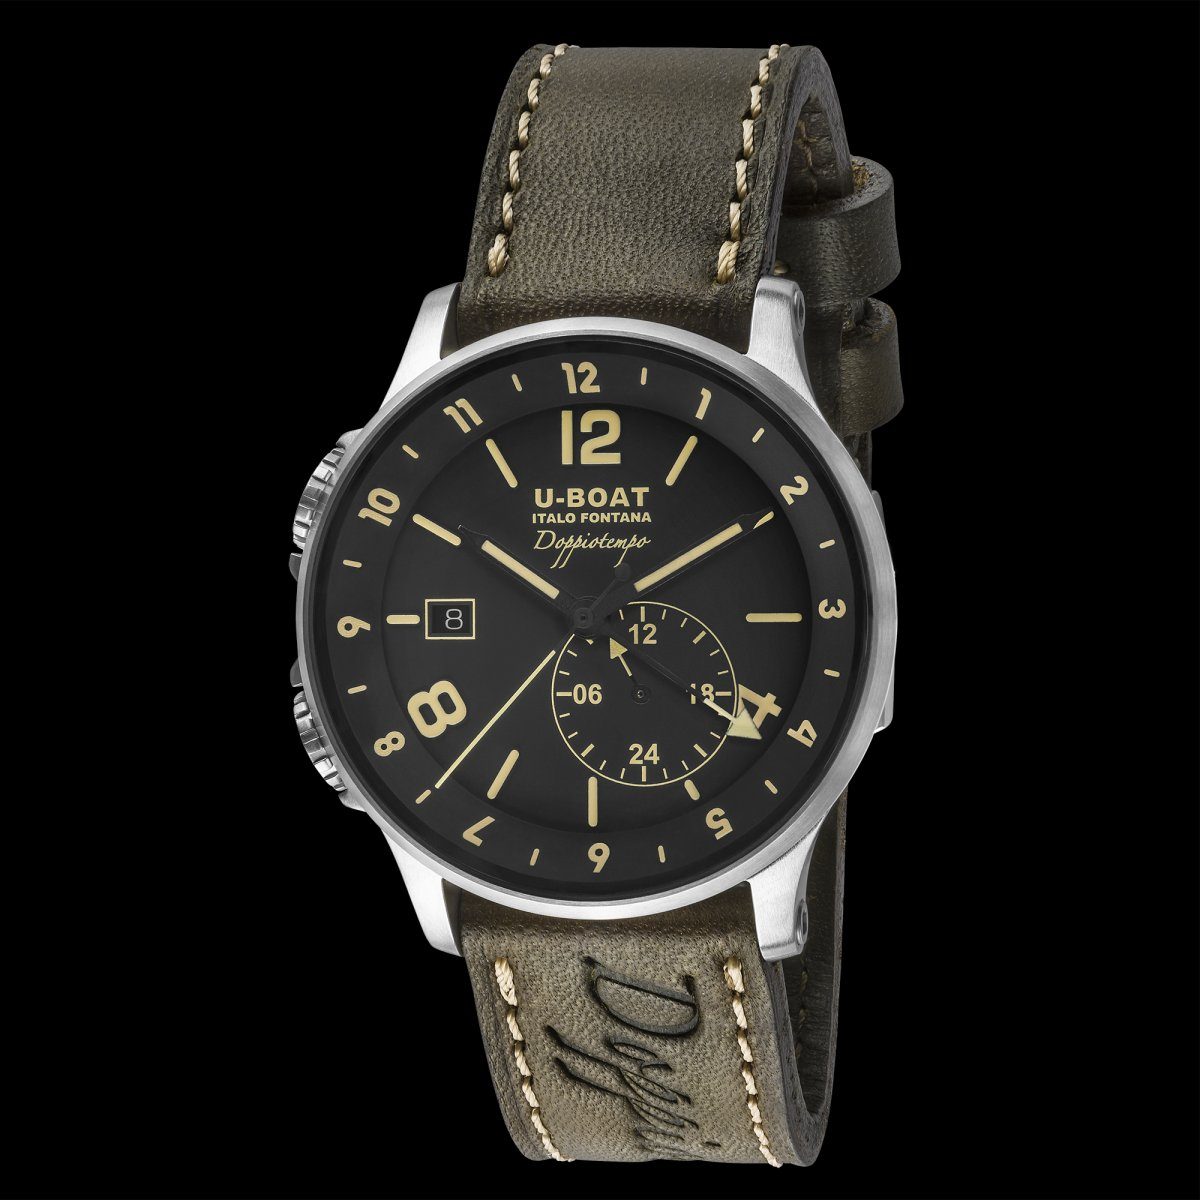 Replica U-Boat 8400 Watches UK With GMT Function